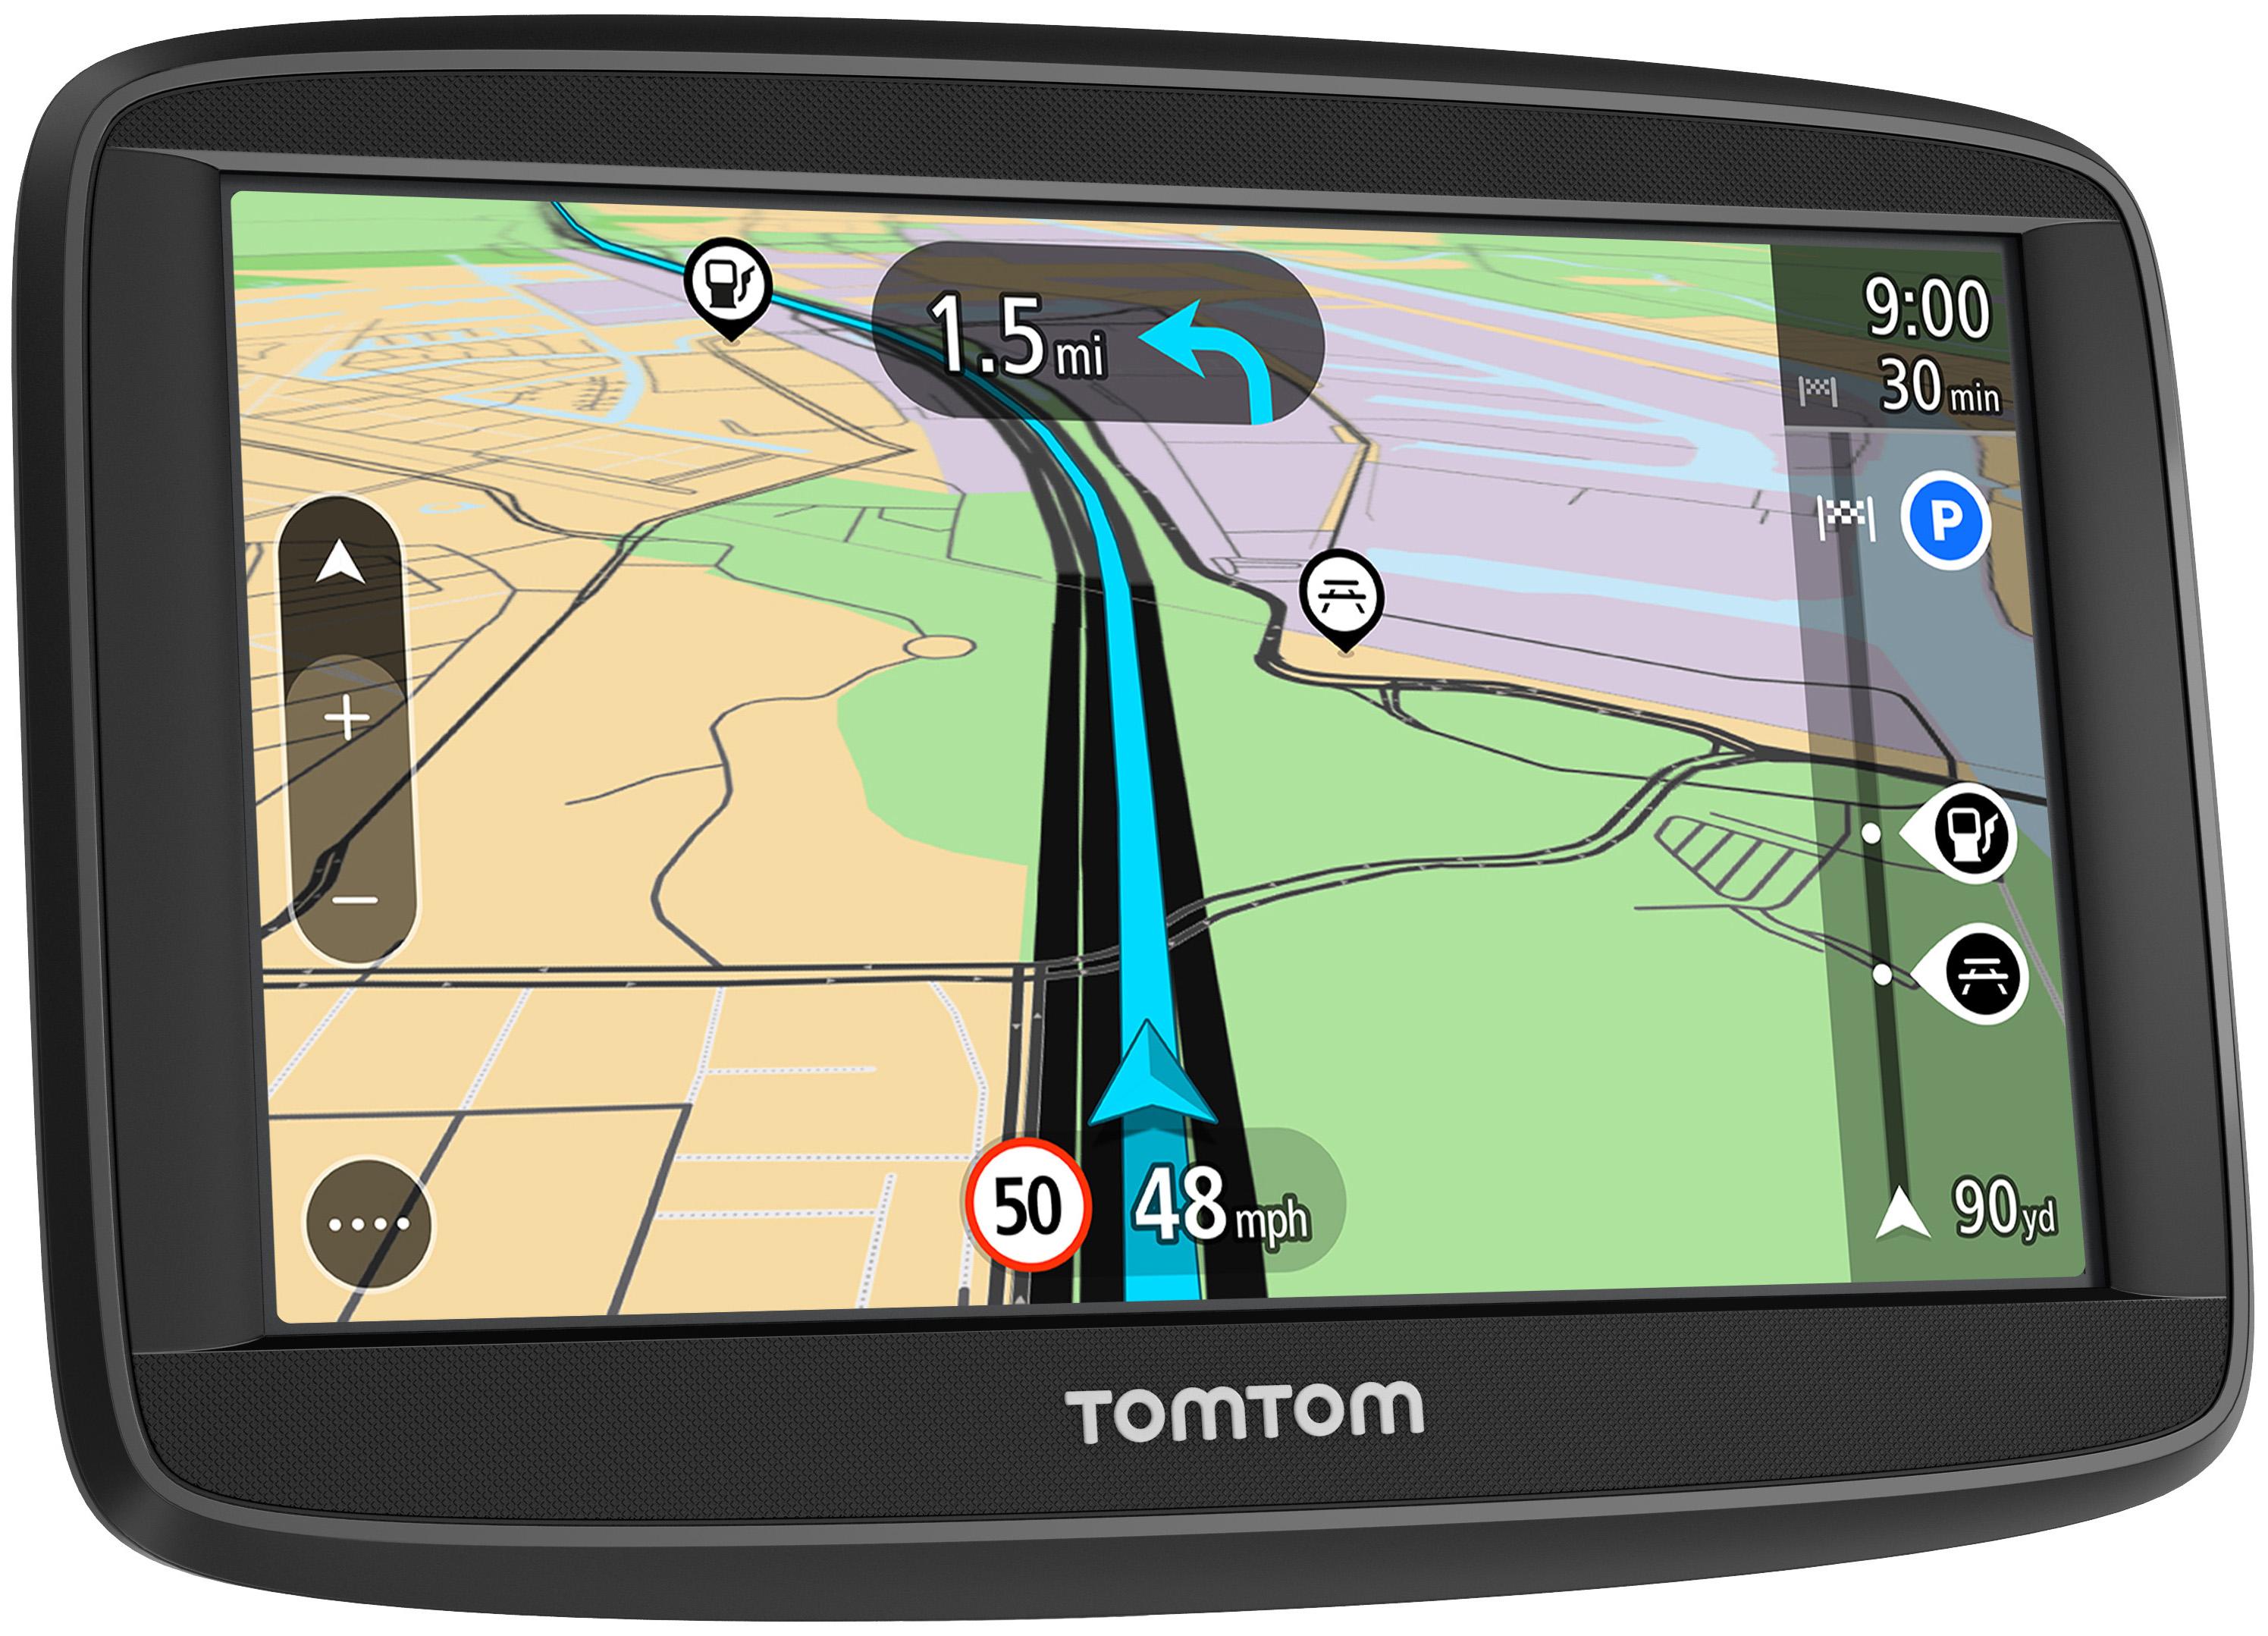 mappe tomtom start craccate